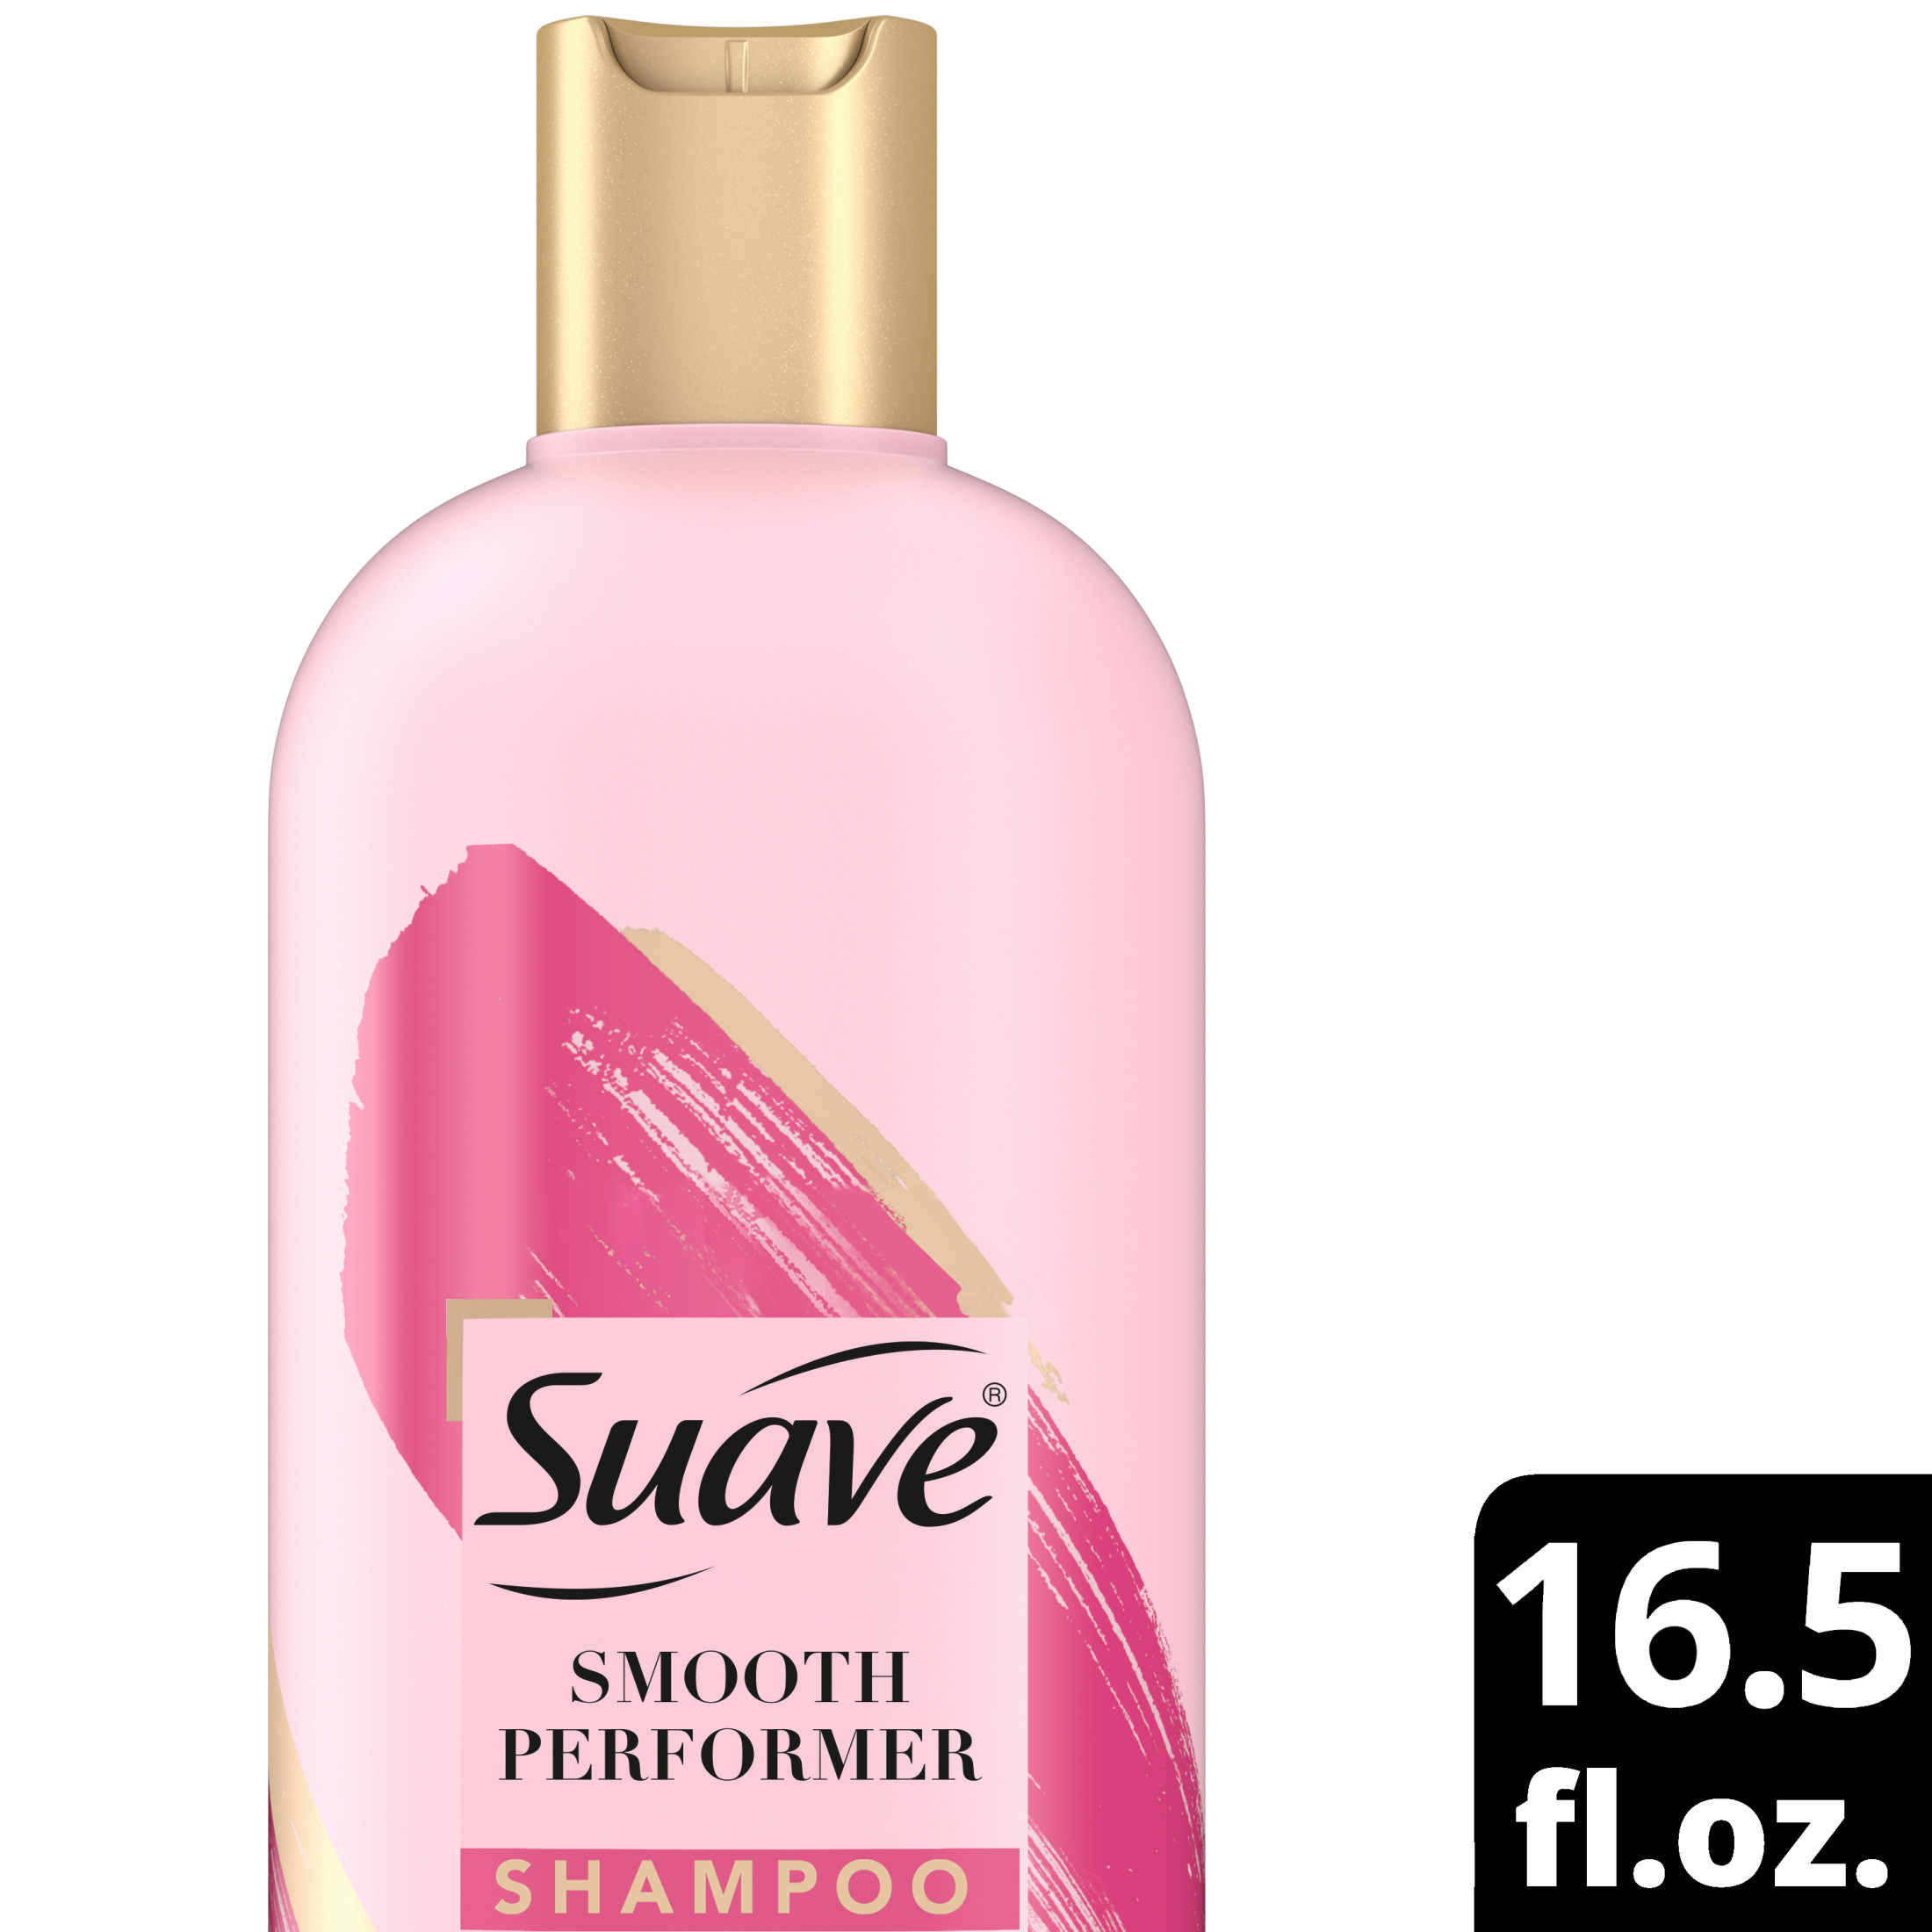 Suave Pink Smooth Performer Smoothing Shampoo, 16.5 oz - image 3 of 12